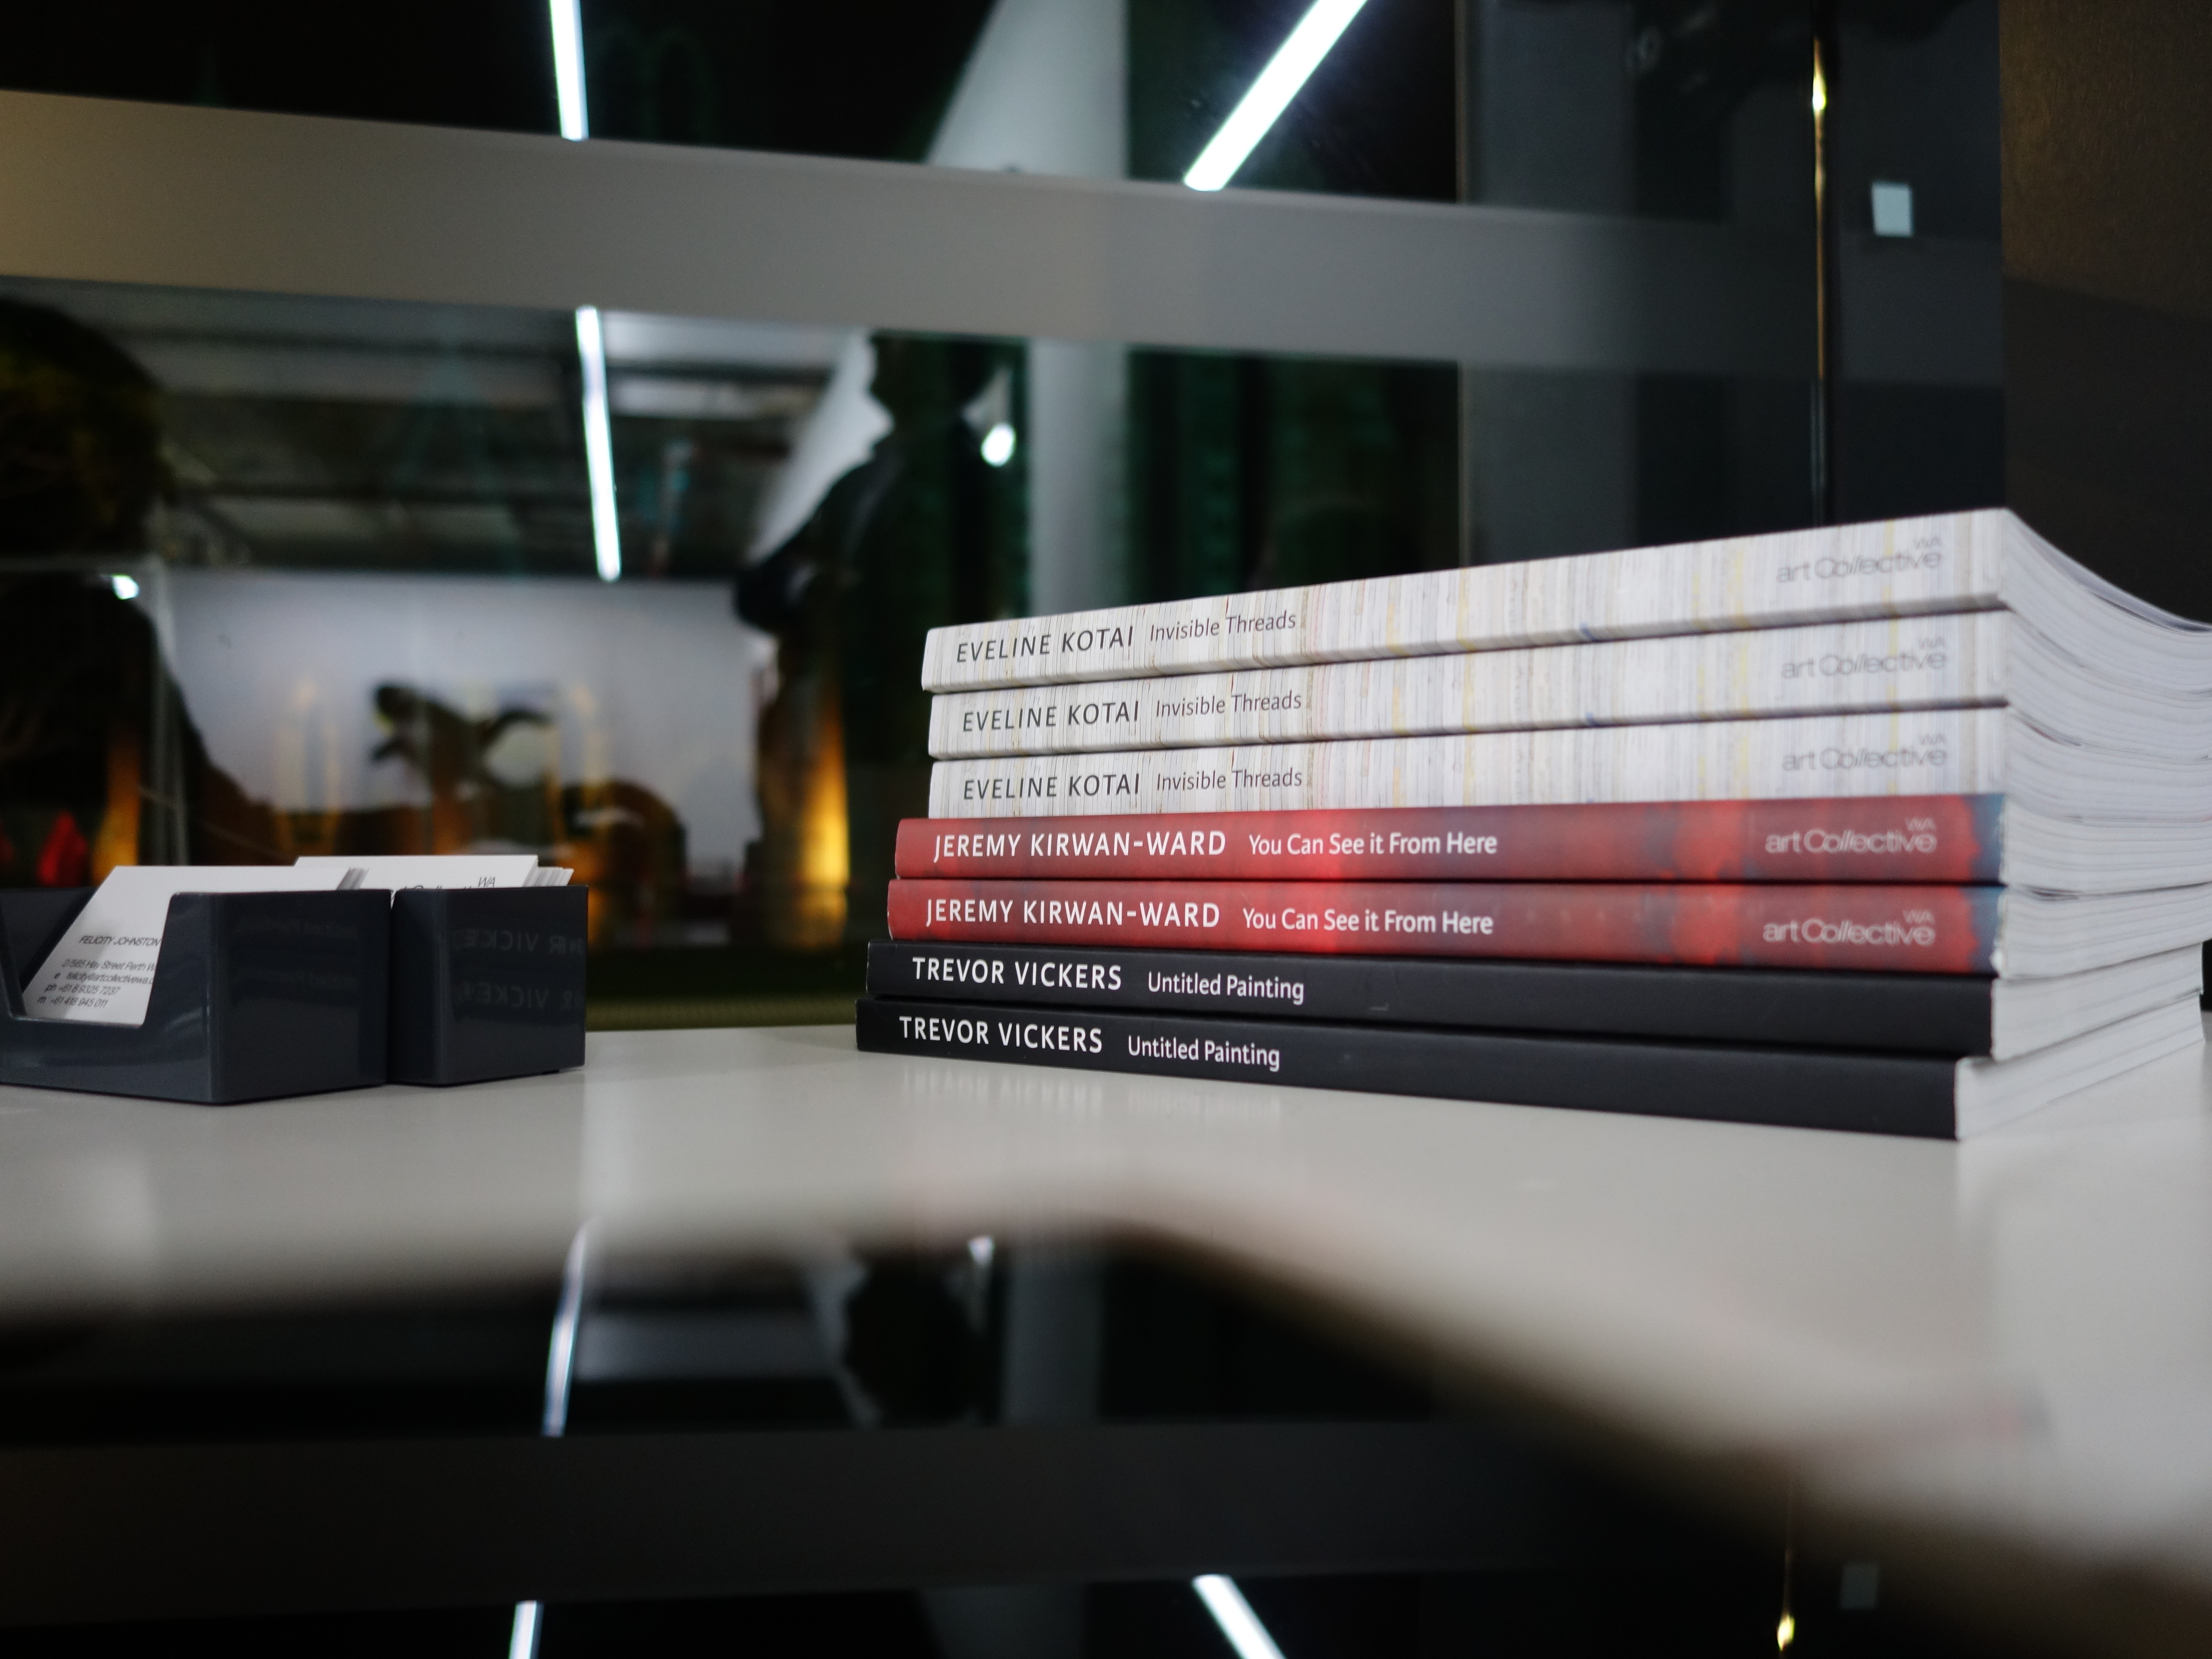 Artist Monographs, published by Art Collective WA.